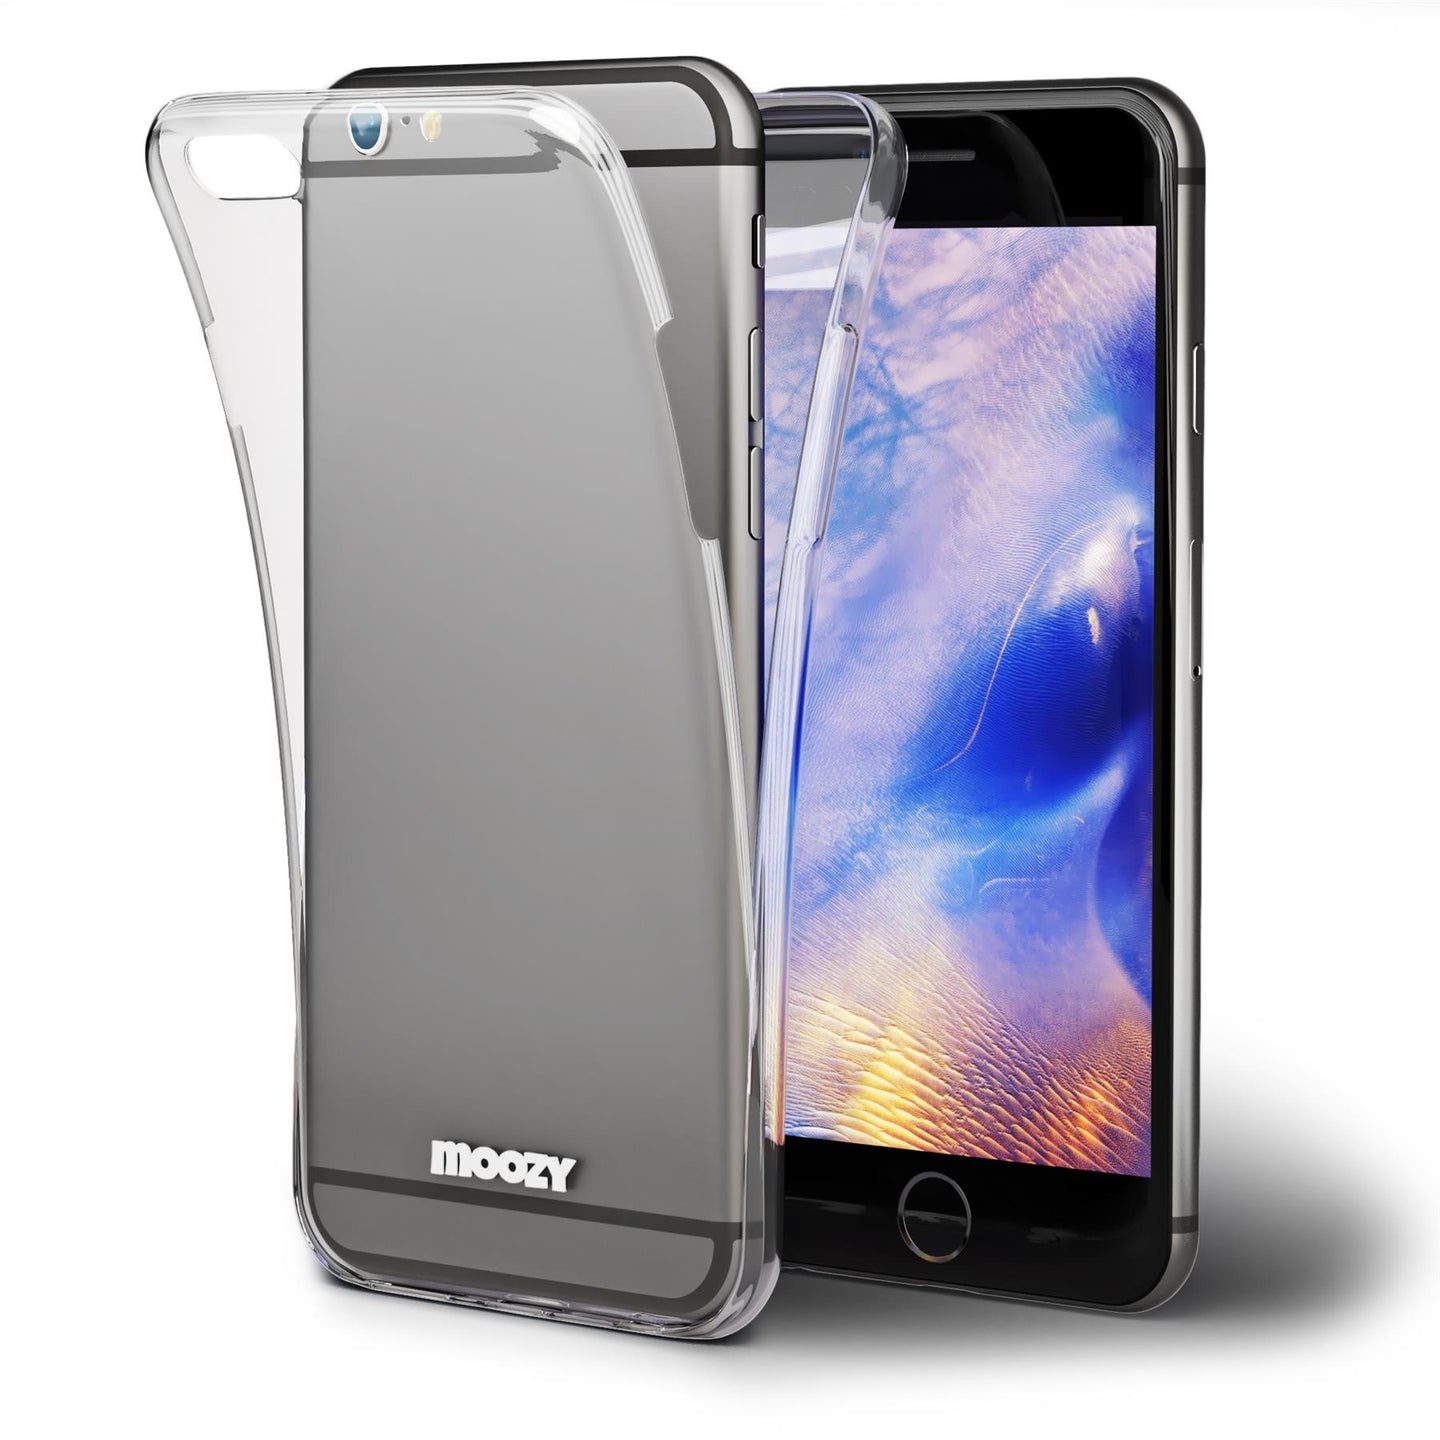 Moozy 360 Degree Case for iPhone 6s, iPhone 6 - Full body Front and Back Slim Clear Transparent TPU Silicone Gel Cover